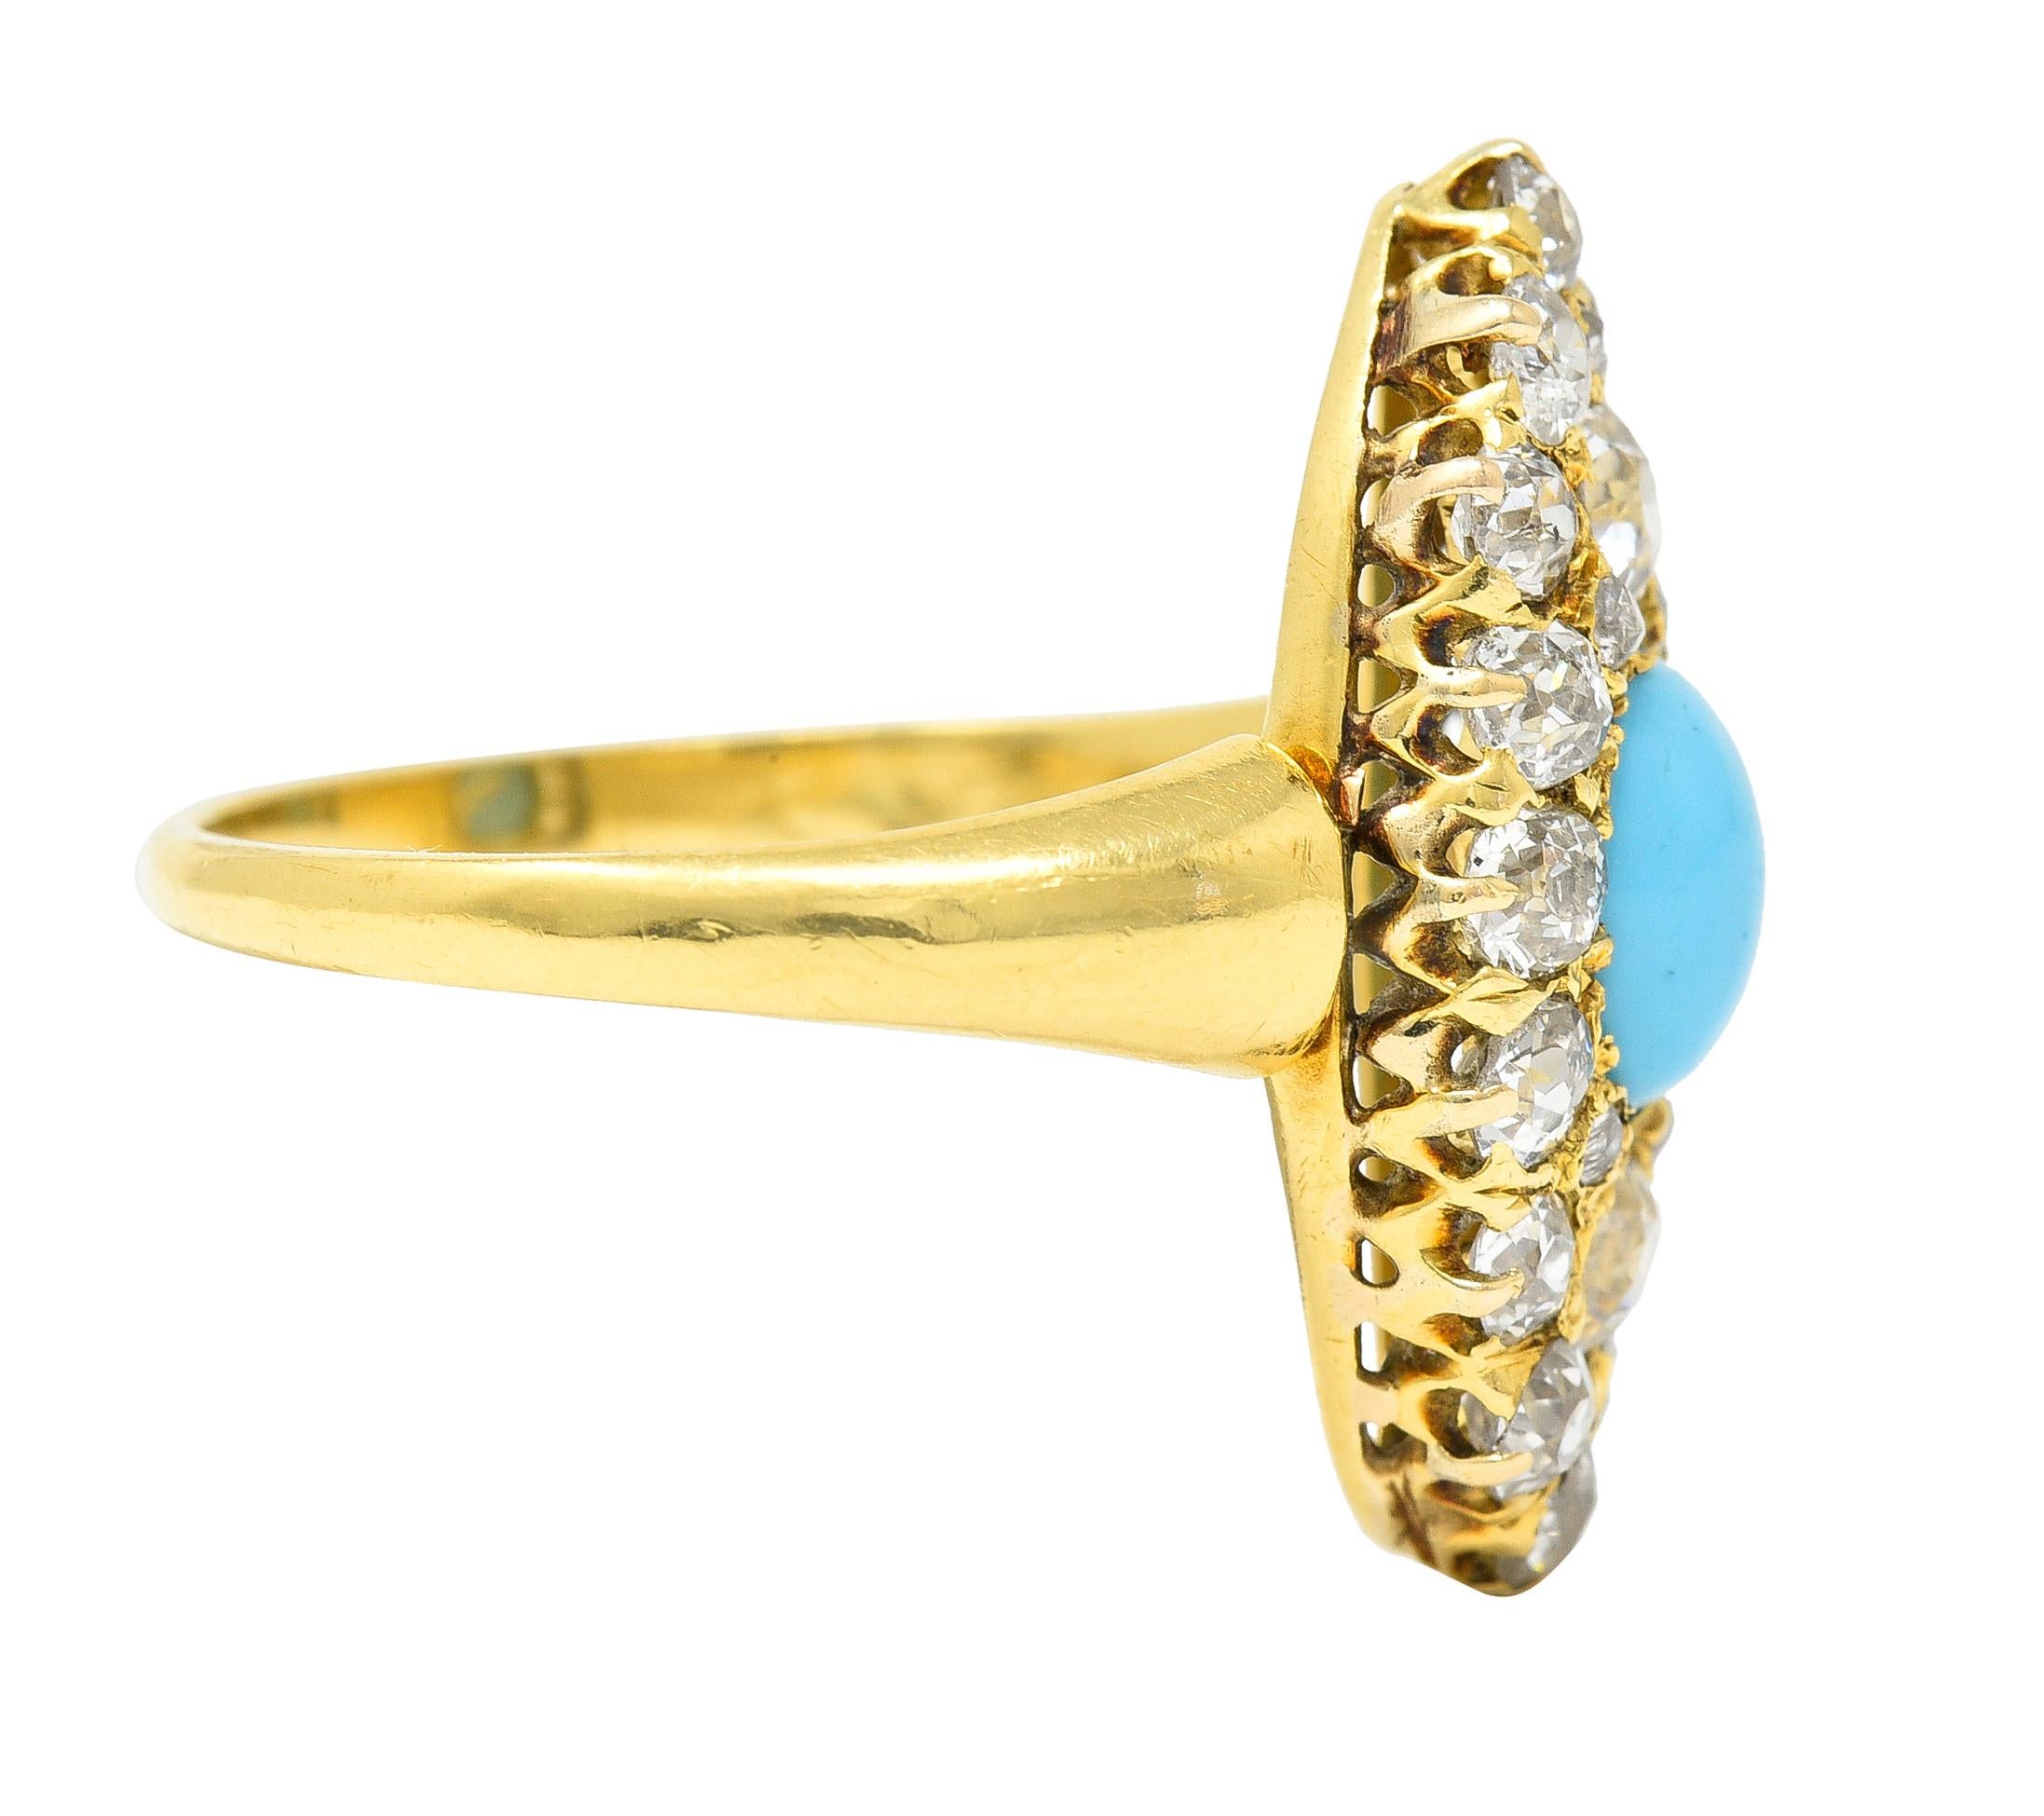 Victorian 1.68 Carat Old European Cut Diamond Turquoise 18 Karat Gold Ring In Excellent Condition For Sale In Philadelphia, PA